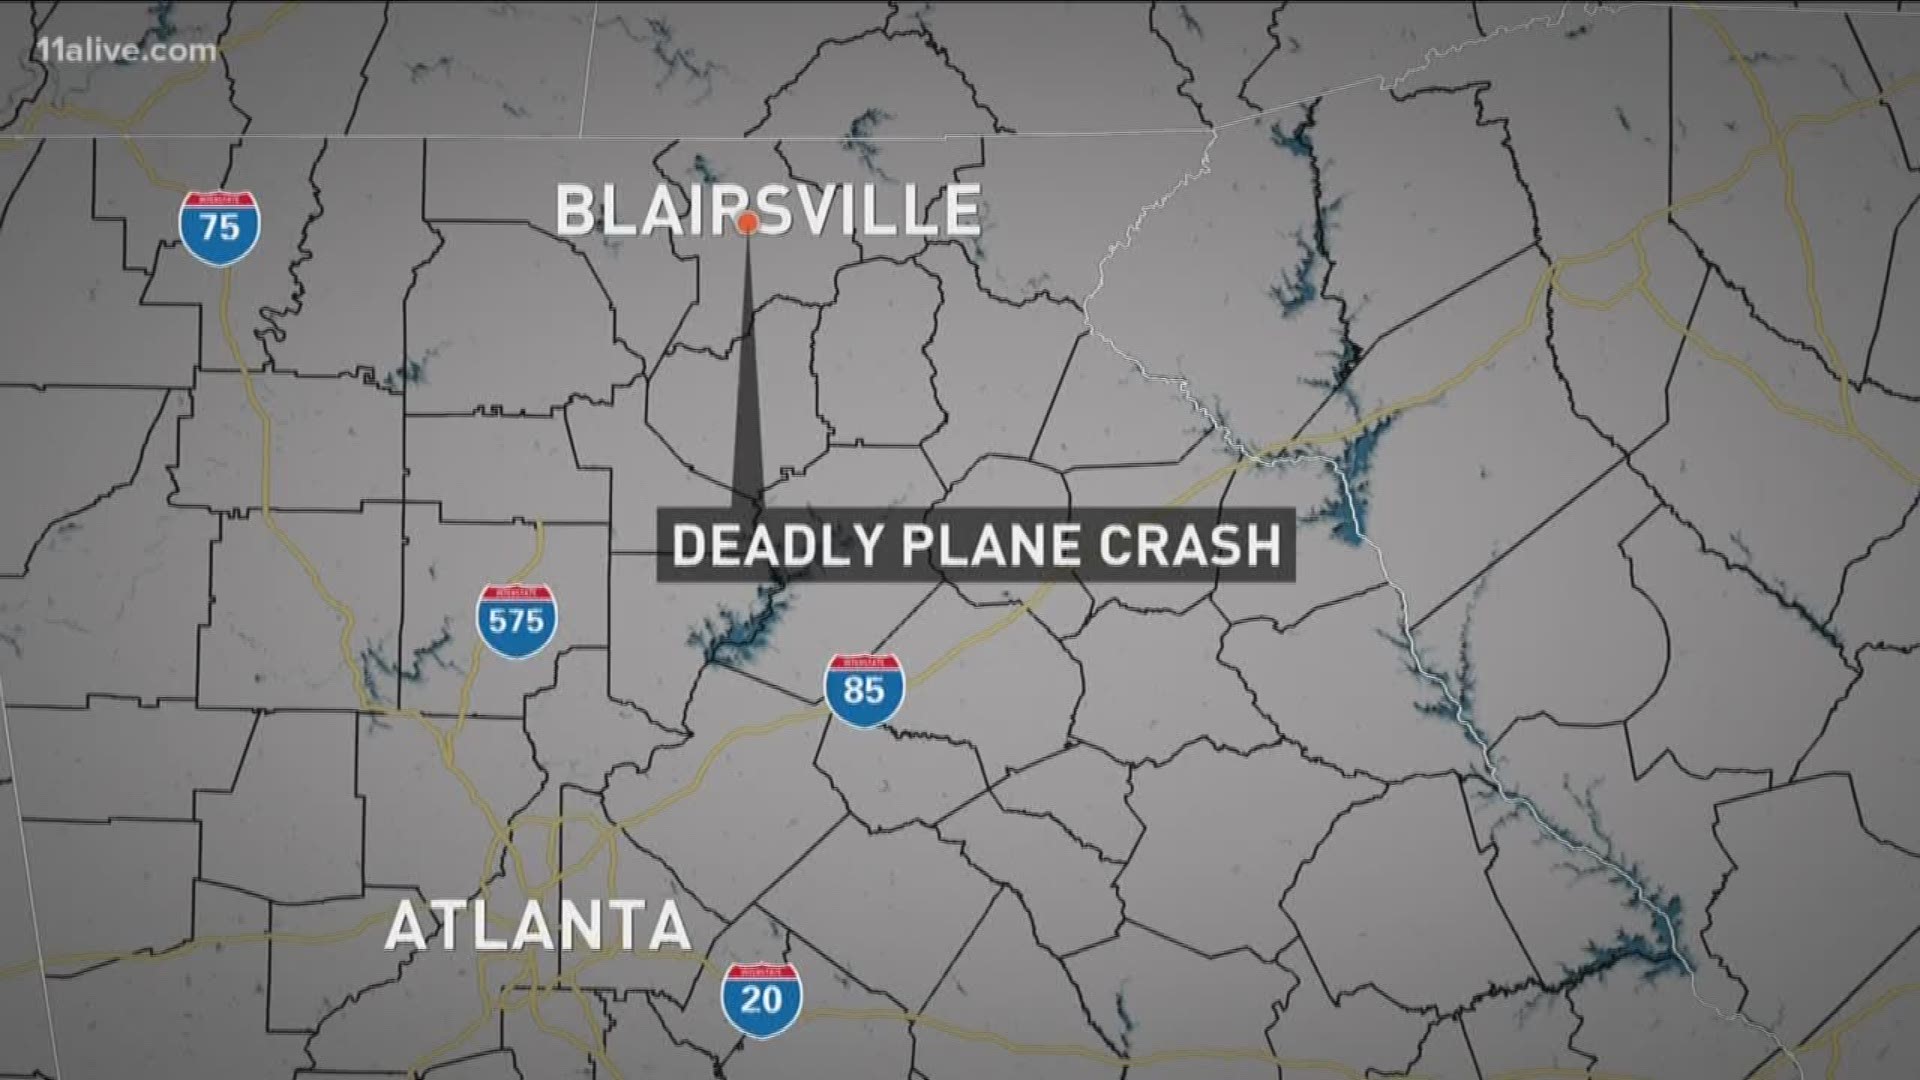 The victims were all from Blairsville, according to police. FAA officials are investigating the crash.